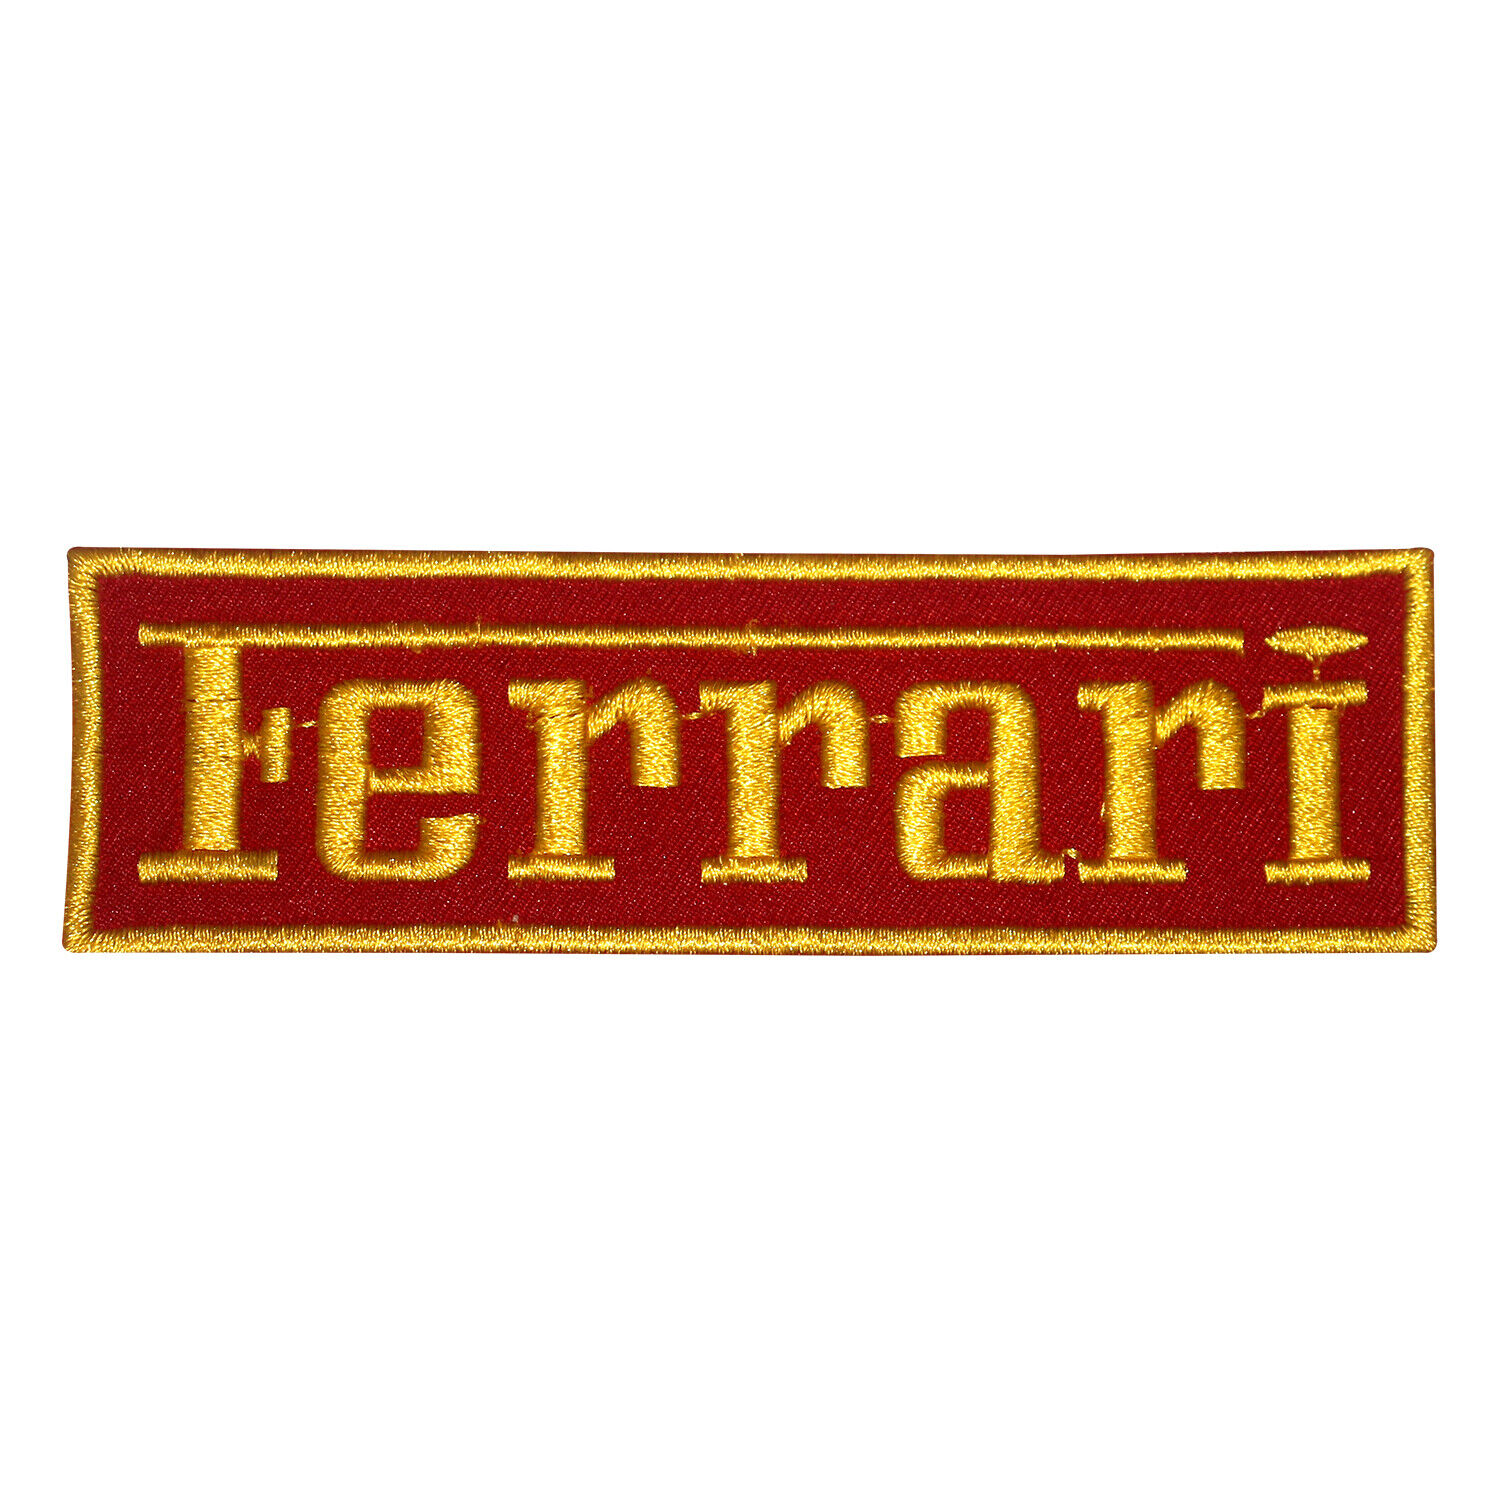 FERRARI Iron/Sew On Embroidered Patch Badge Appliqué For Clothes